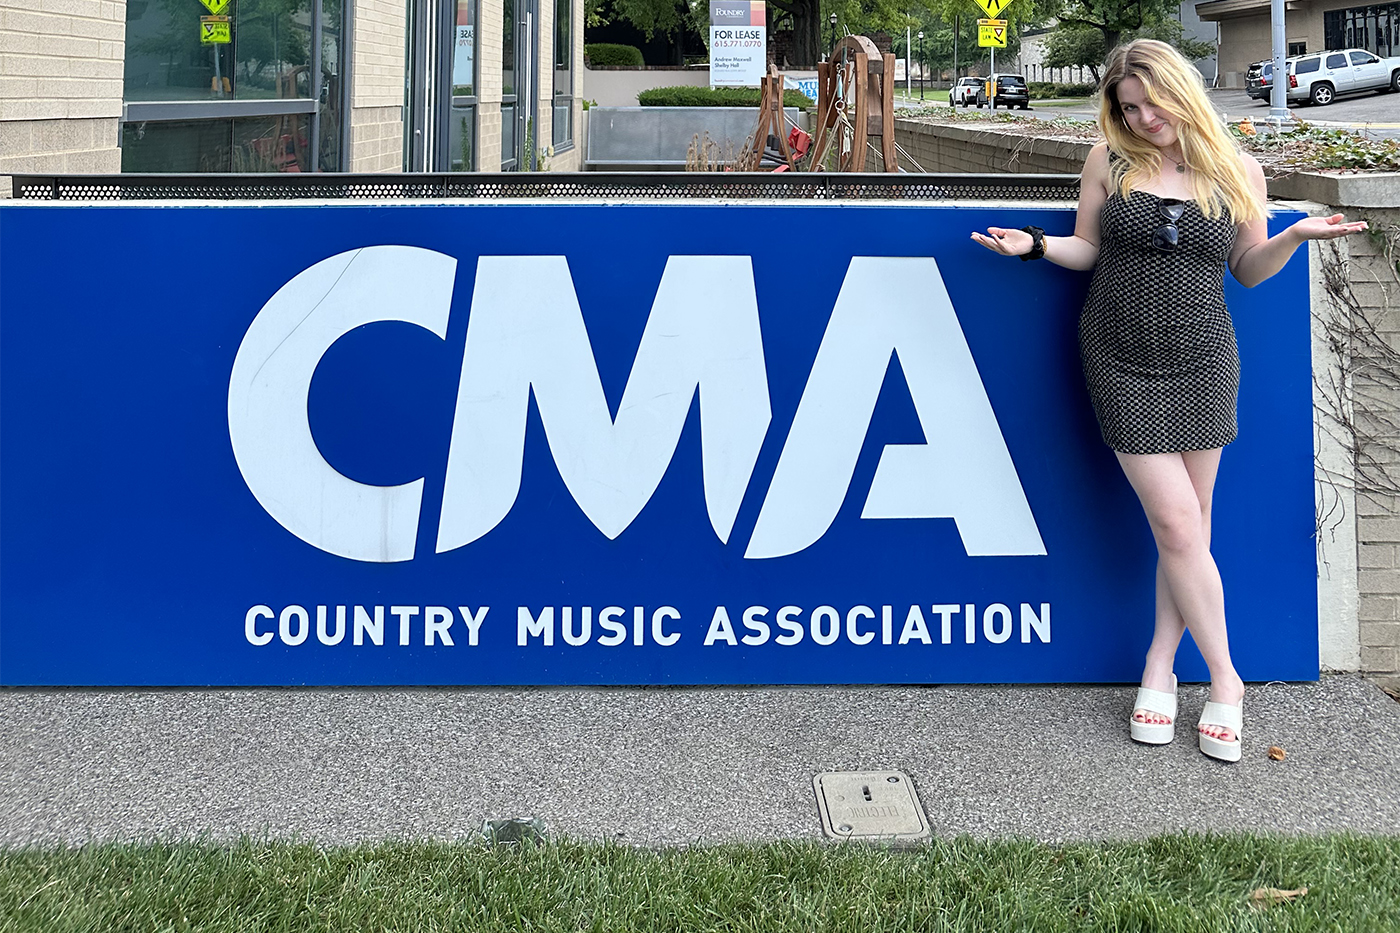 Olivia Guihan posing in front of a CMA sign